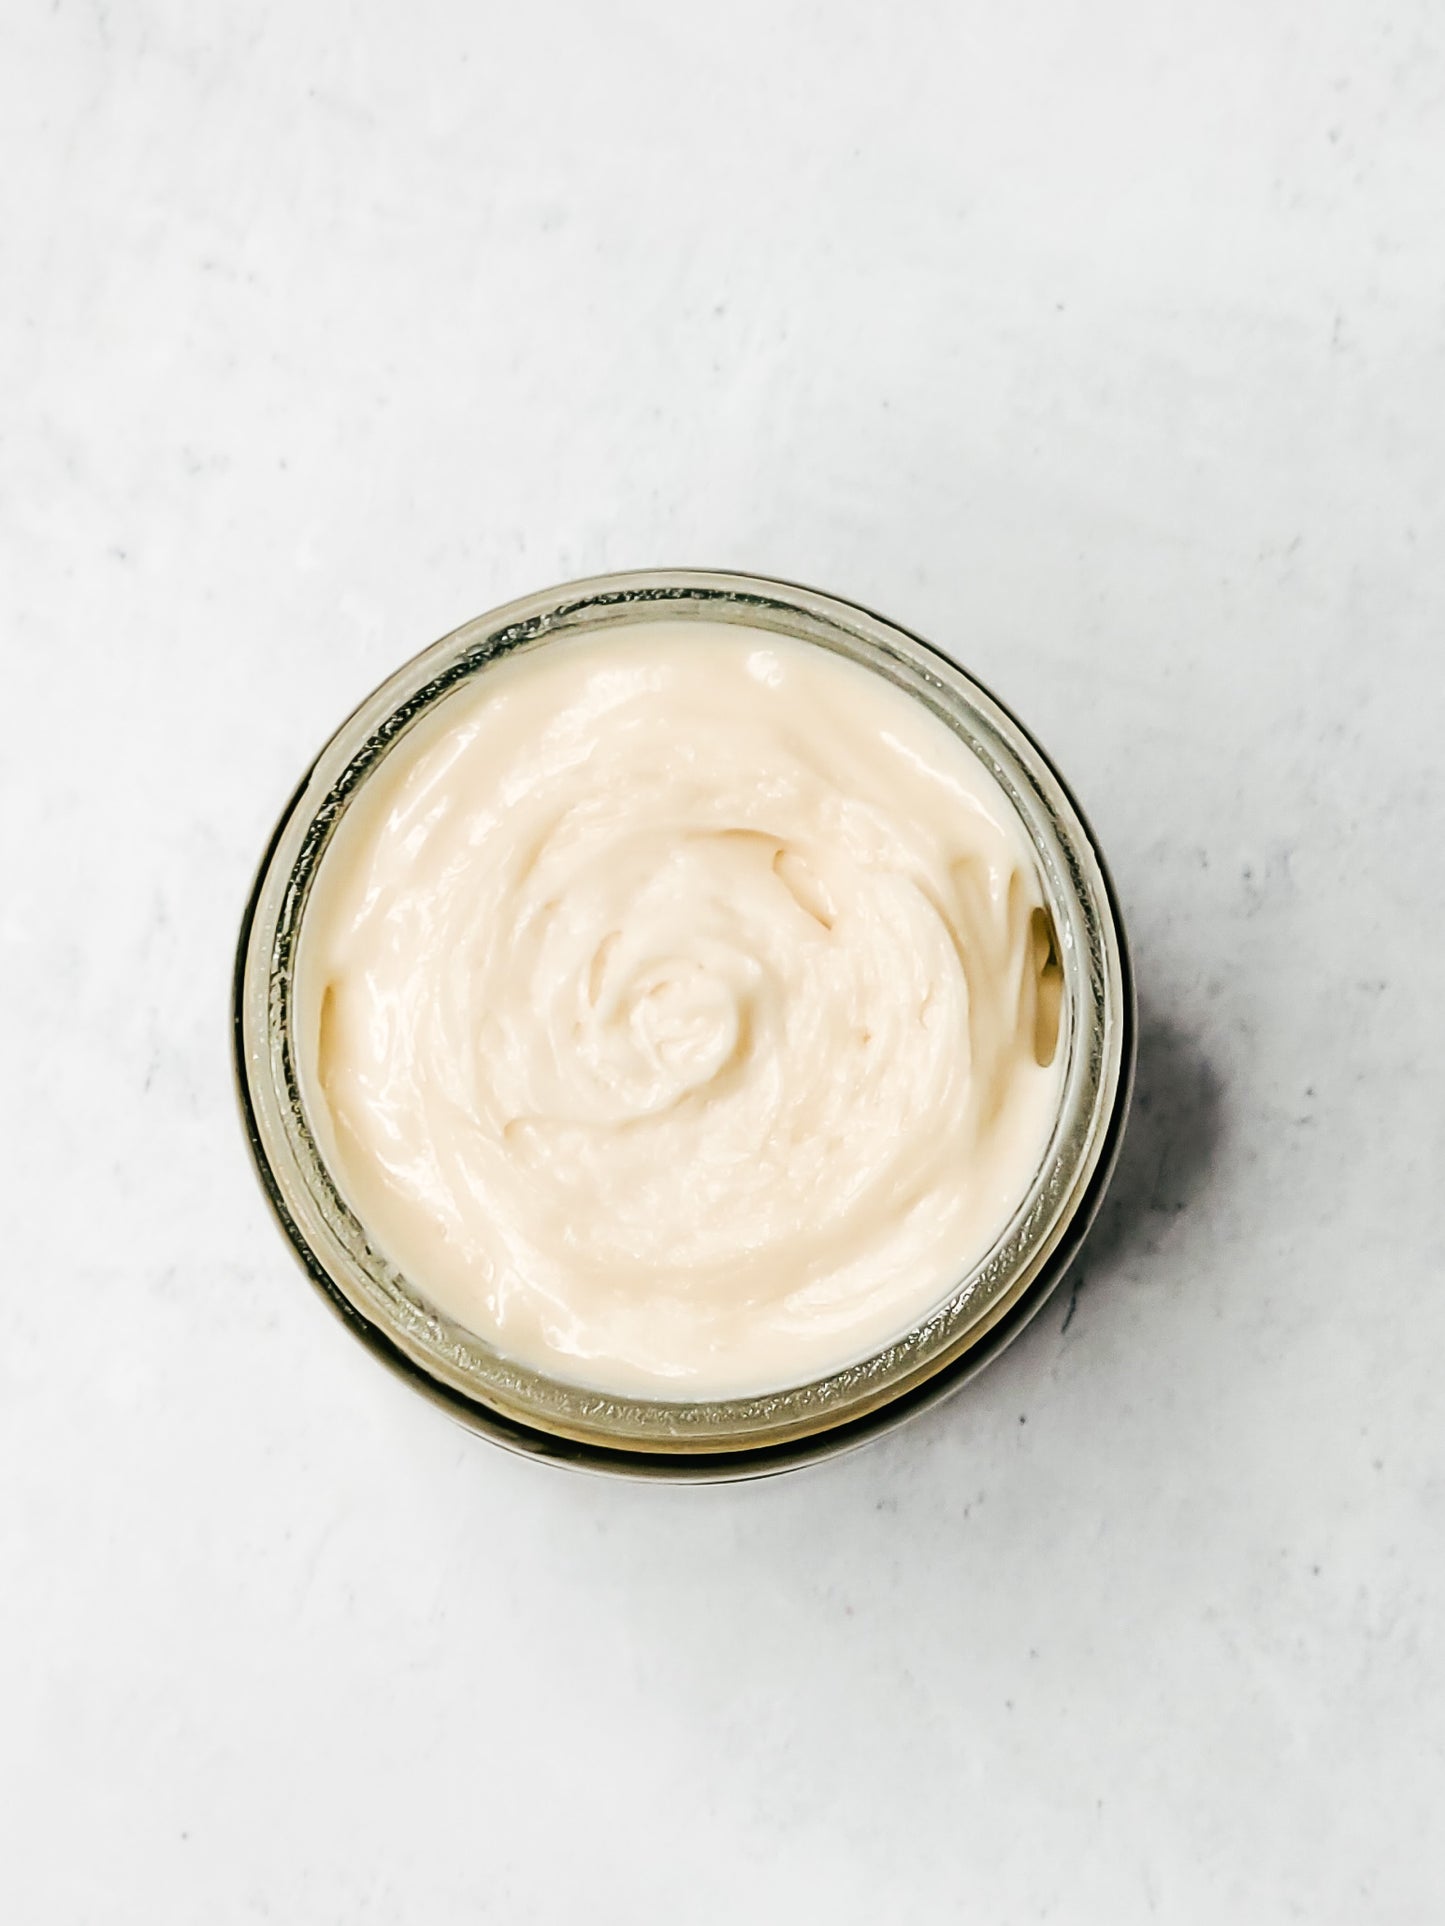 Sanctuary - Luxury Whipped Body Butter